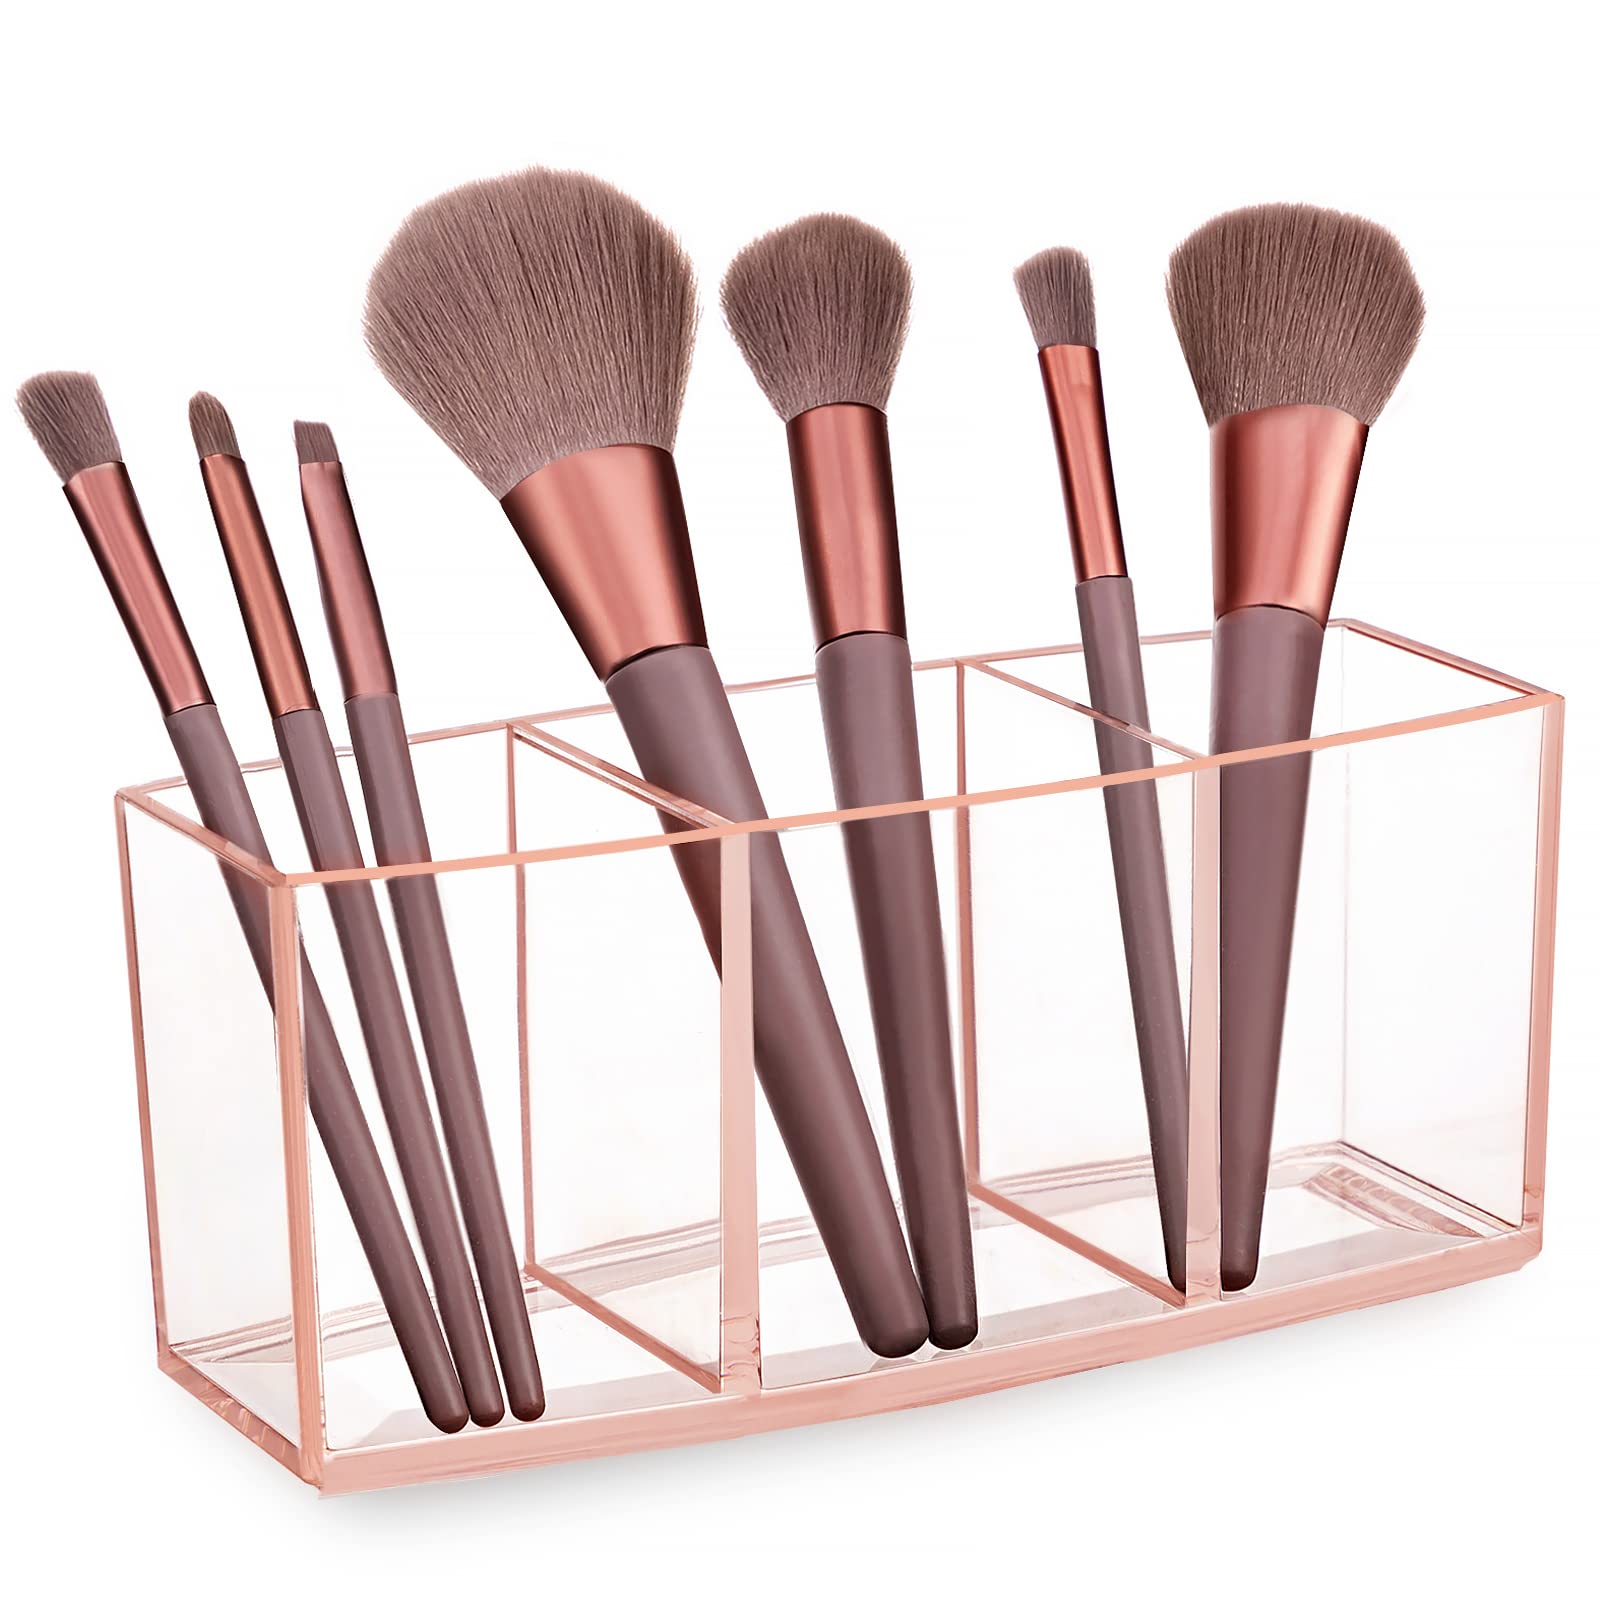 Makeup Brush Holders Review - Hand decorated